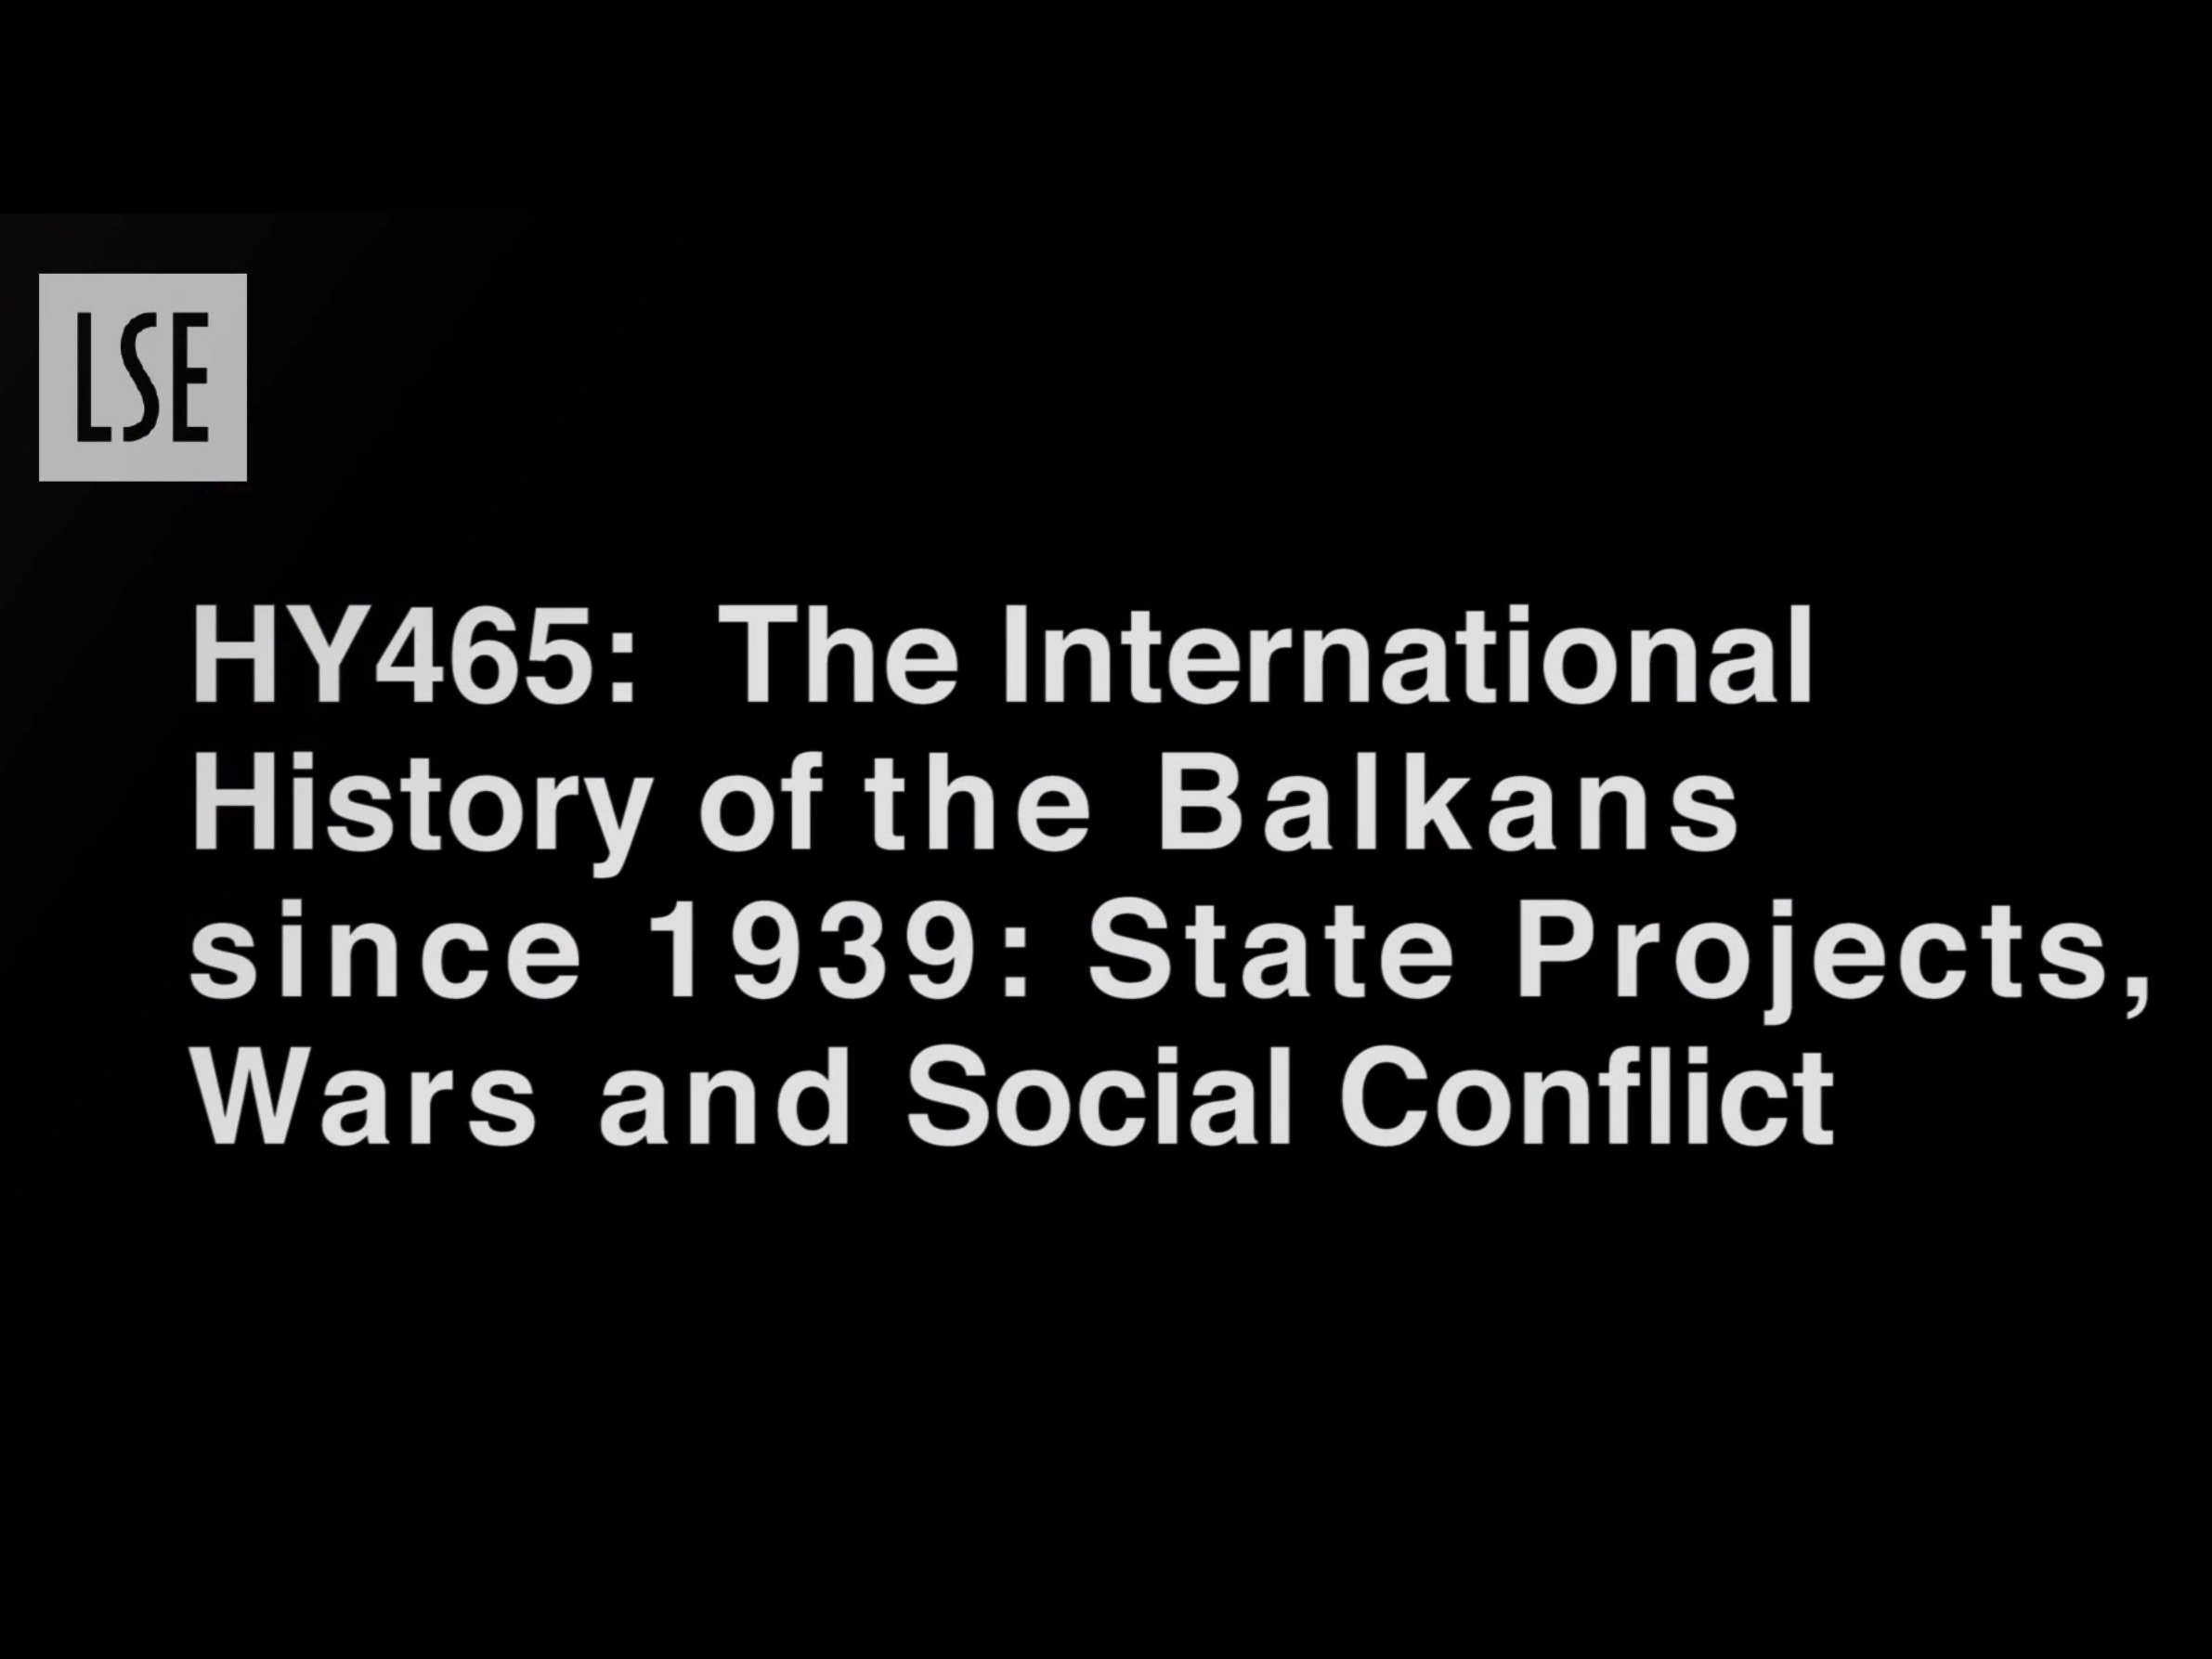 HY465: The International History of the Balkans since 1939: State Projects, Wars, and Social Conflict